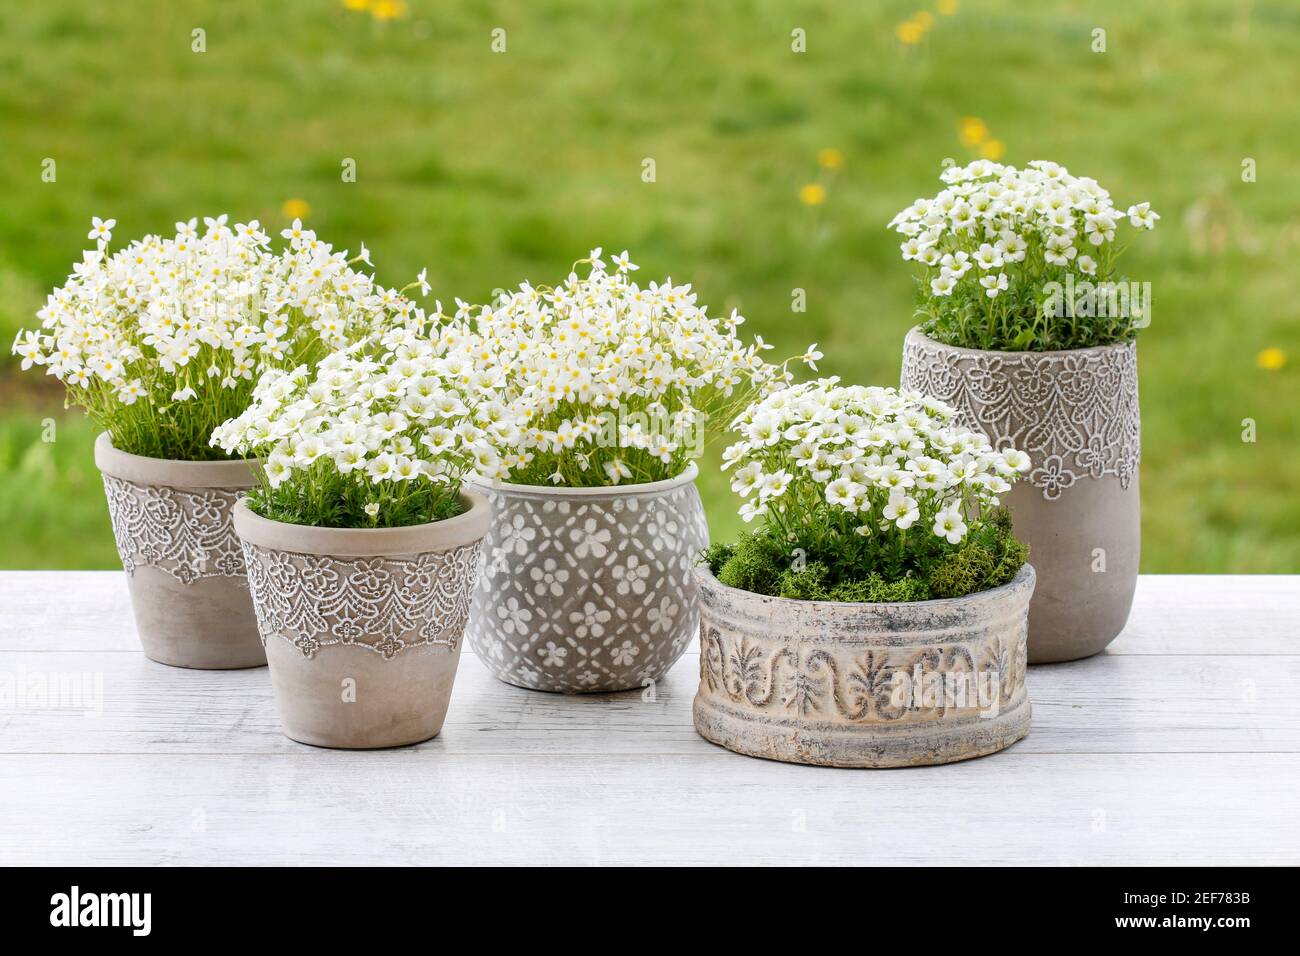 Saxifraga arendsii (Schneeteppich) flowers on green background, copy space Stock Photo